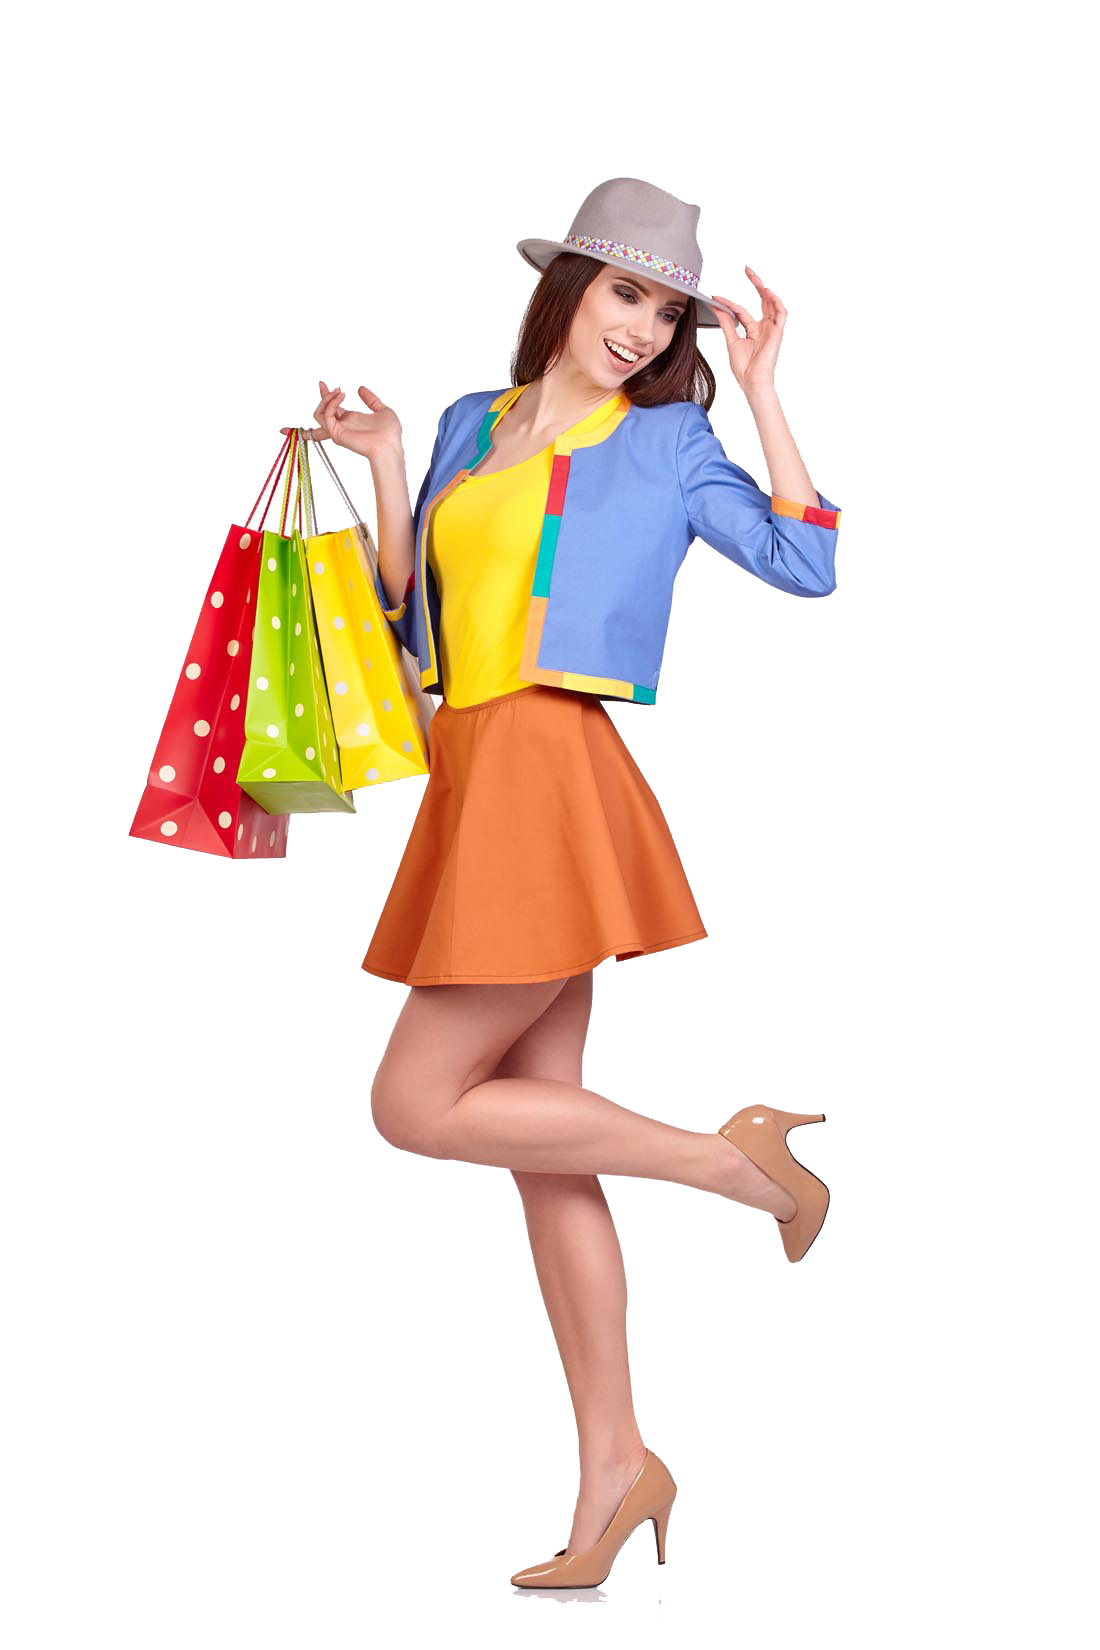 Shopping Woman Fashion Beauty Free Download Image Clipart